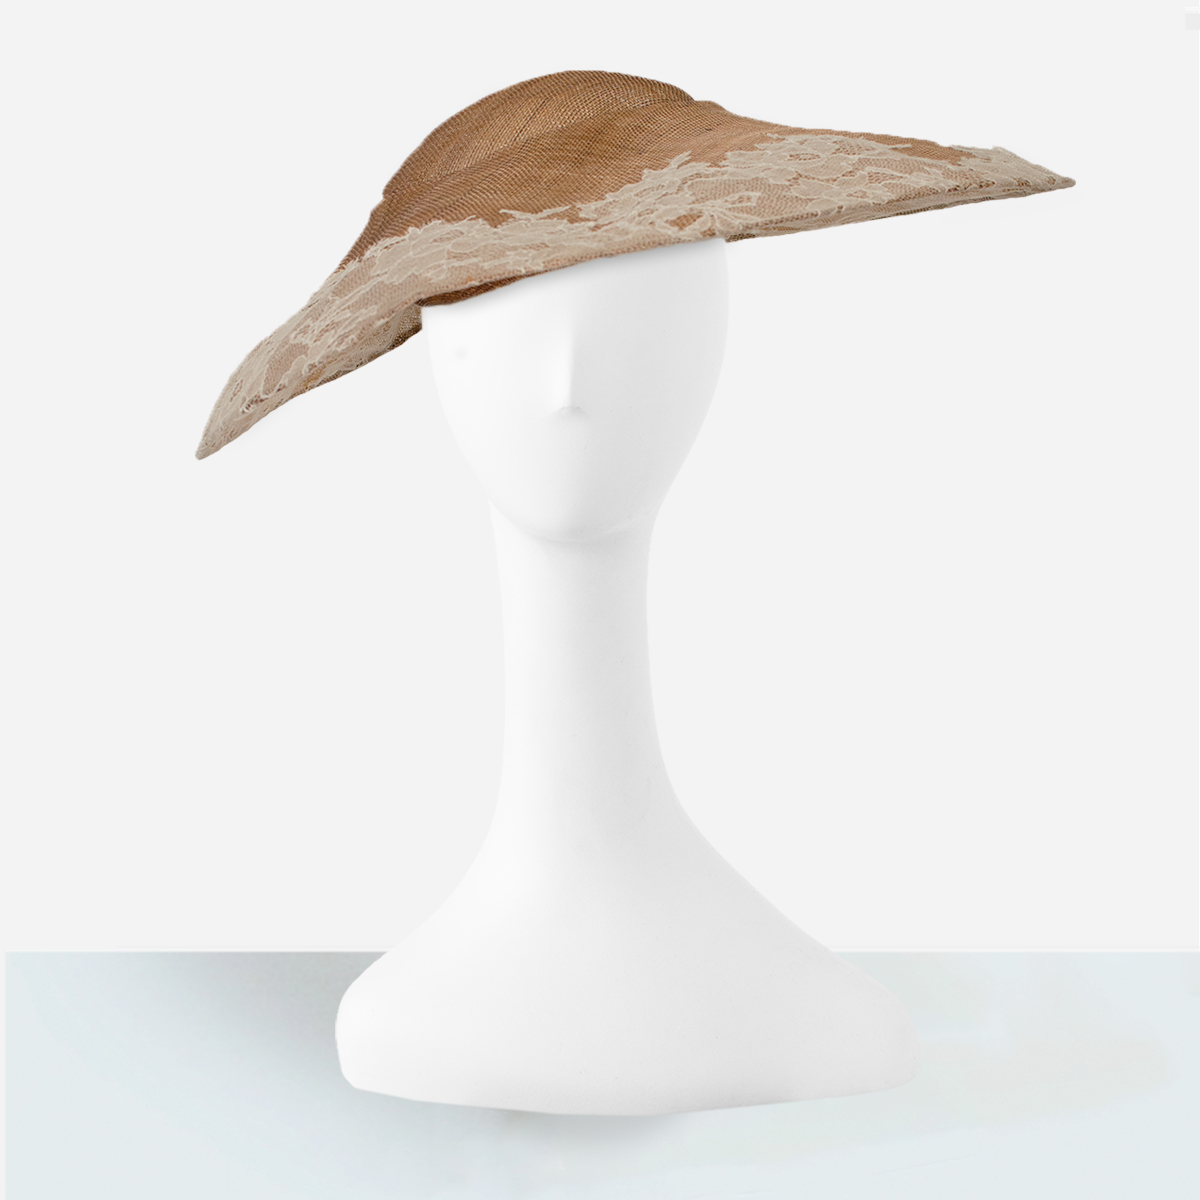 Parisian French straw lace hat